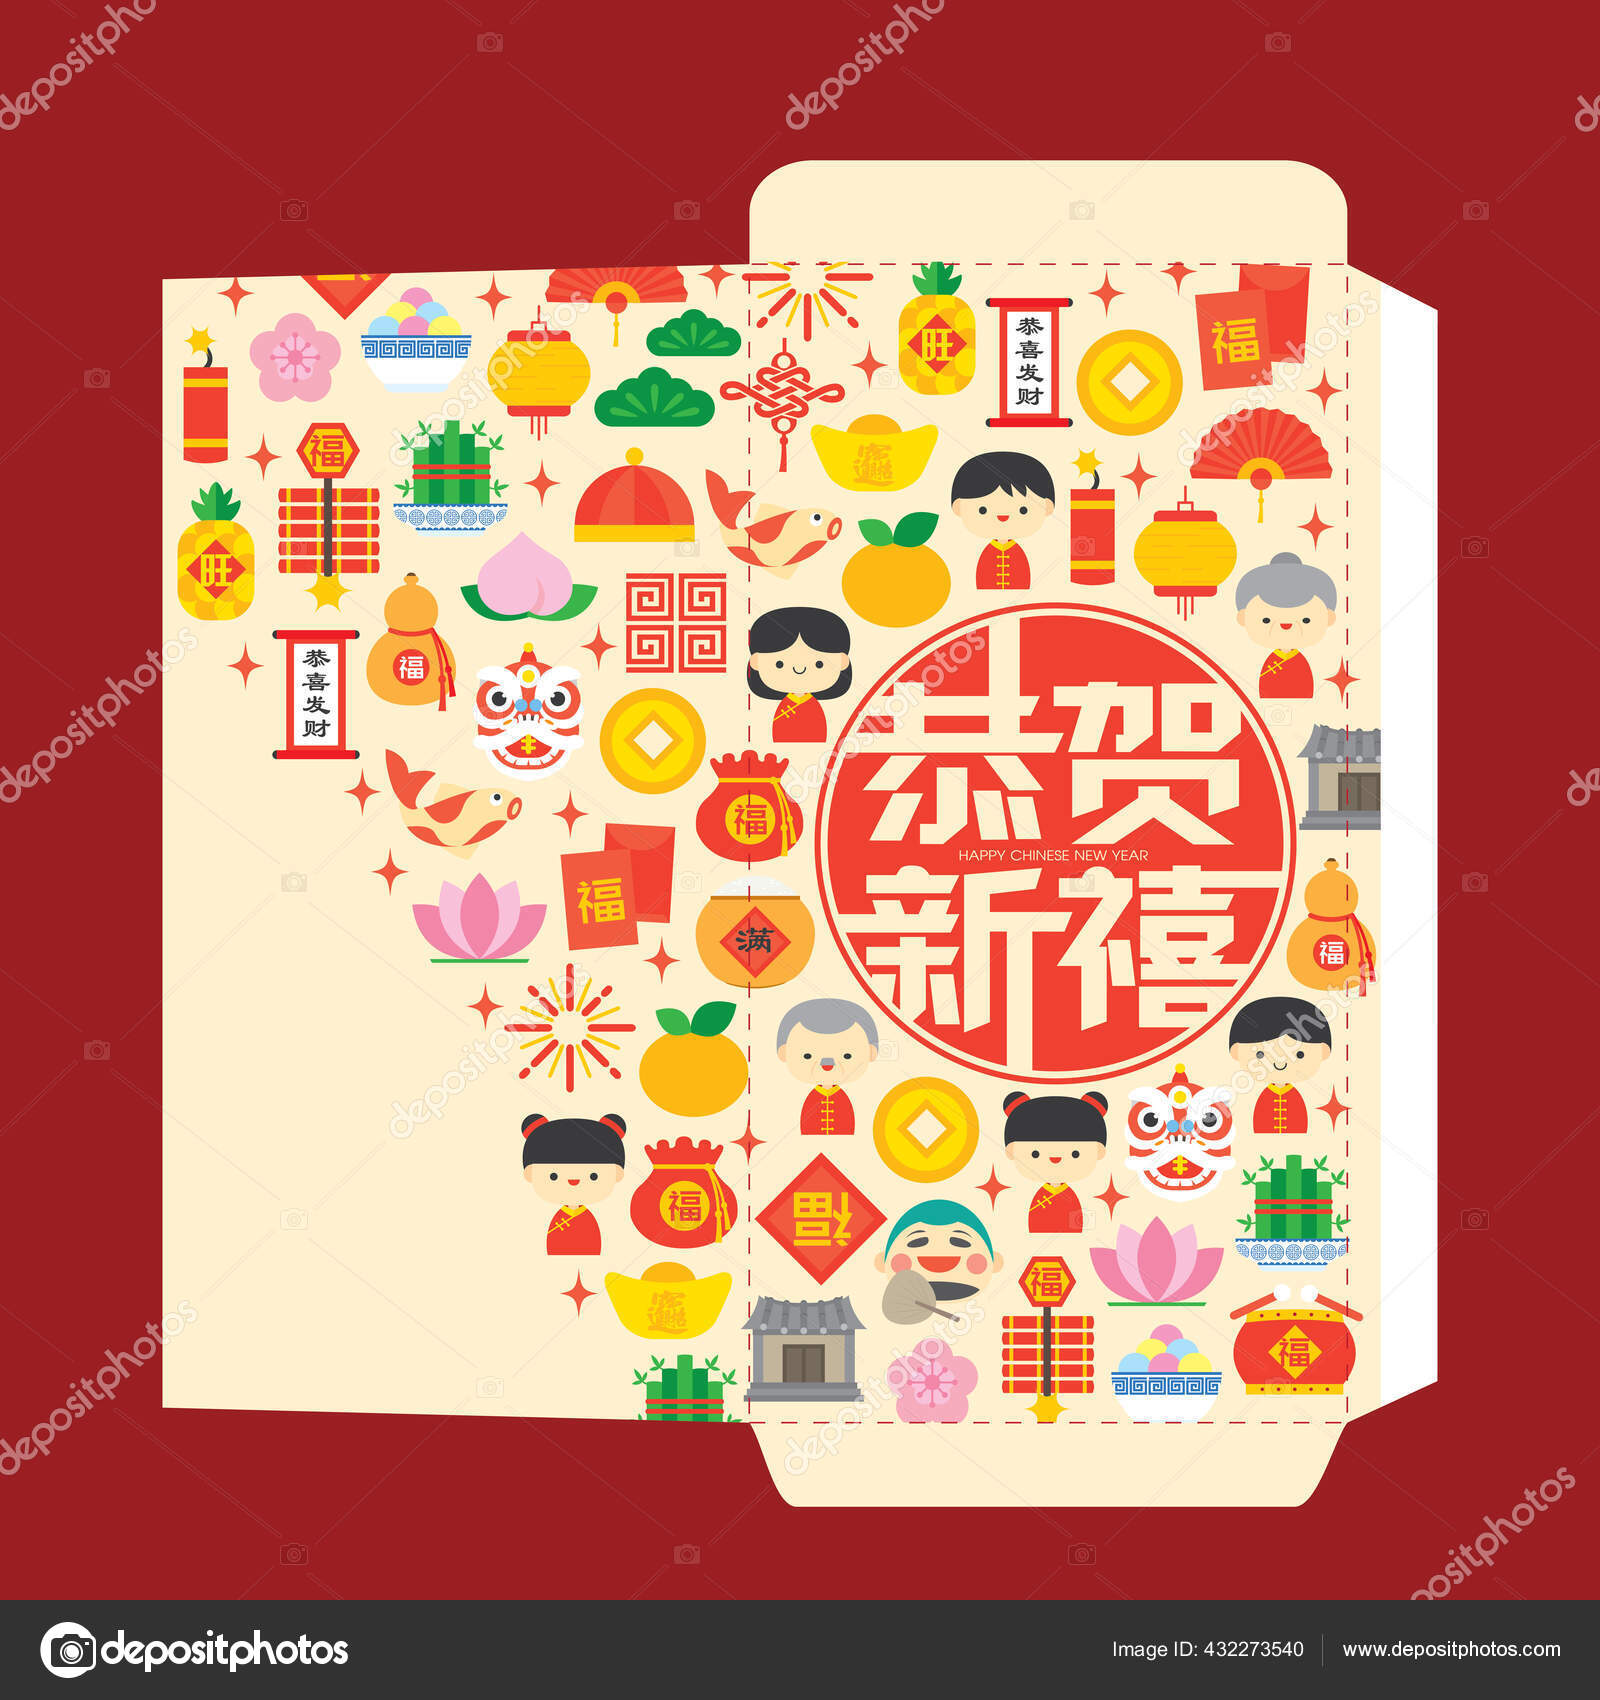 Chinese New Year Red Envelope Templates